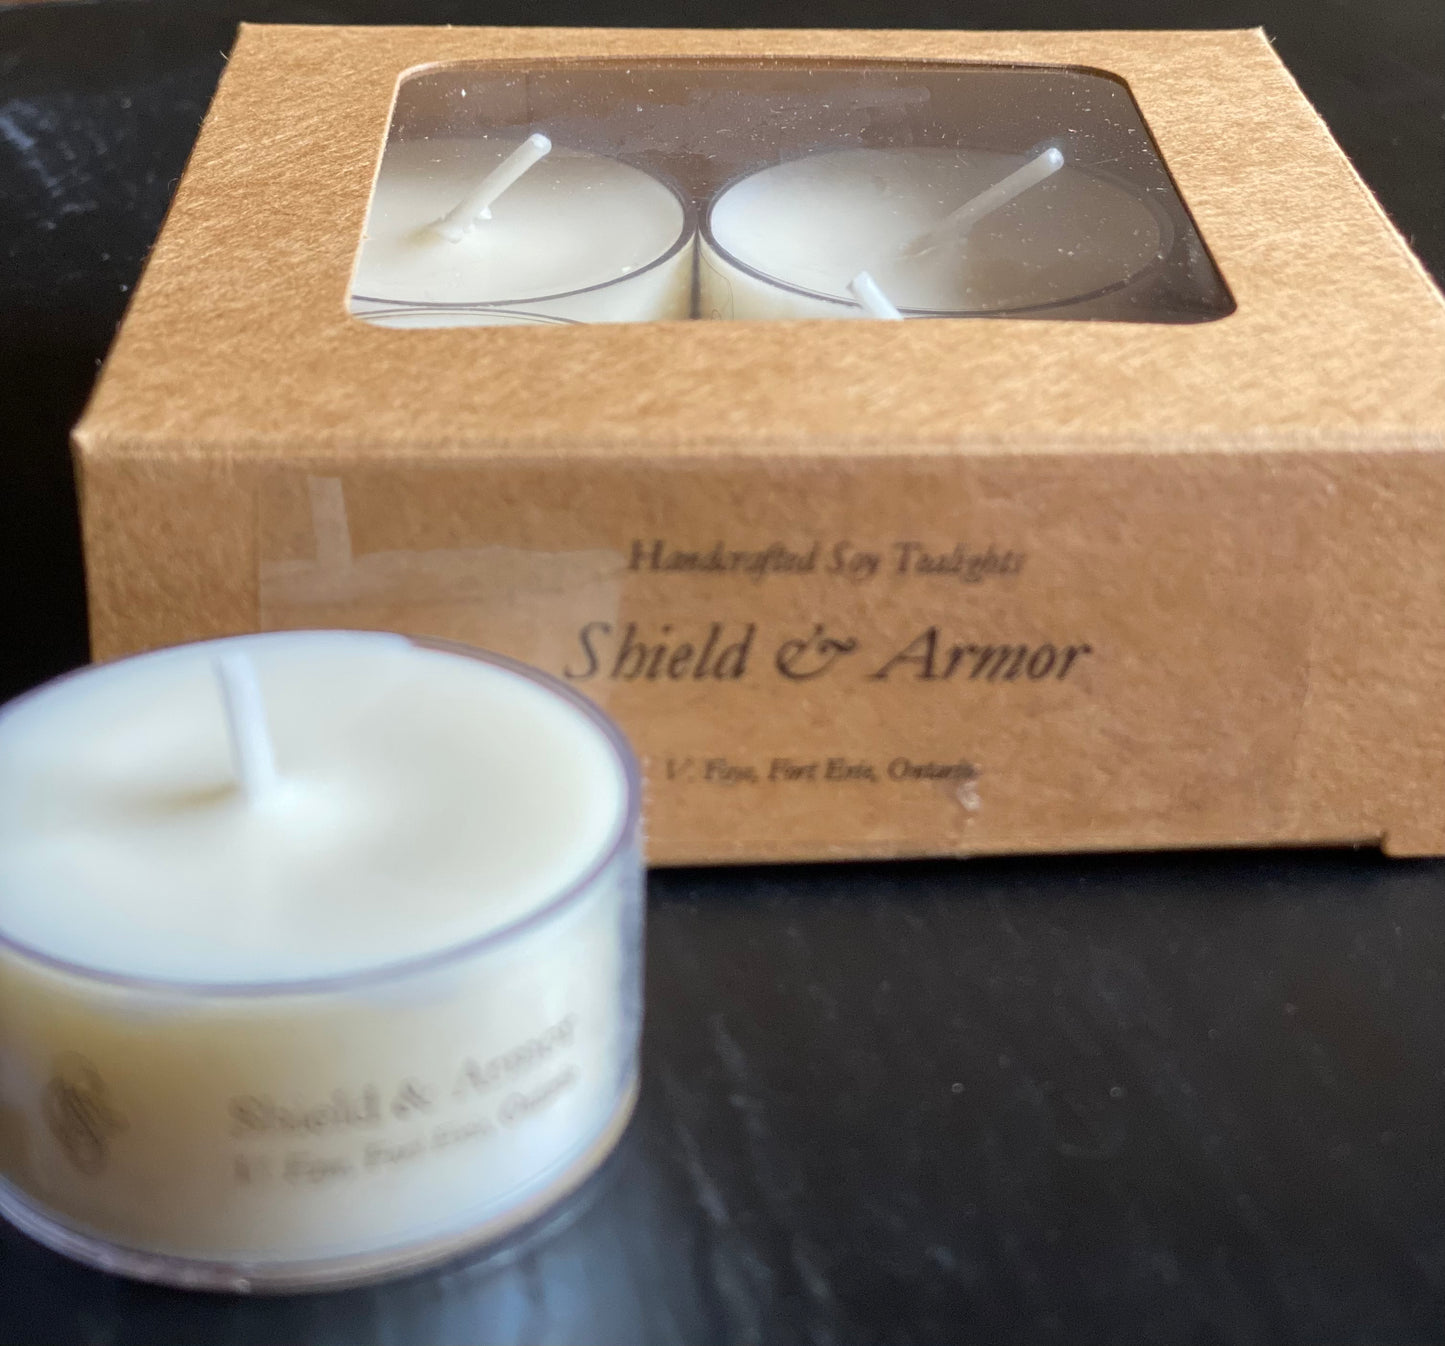 Shield & Armor Candle